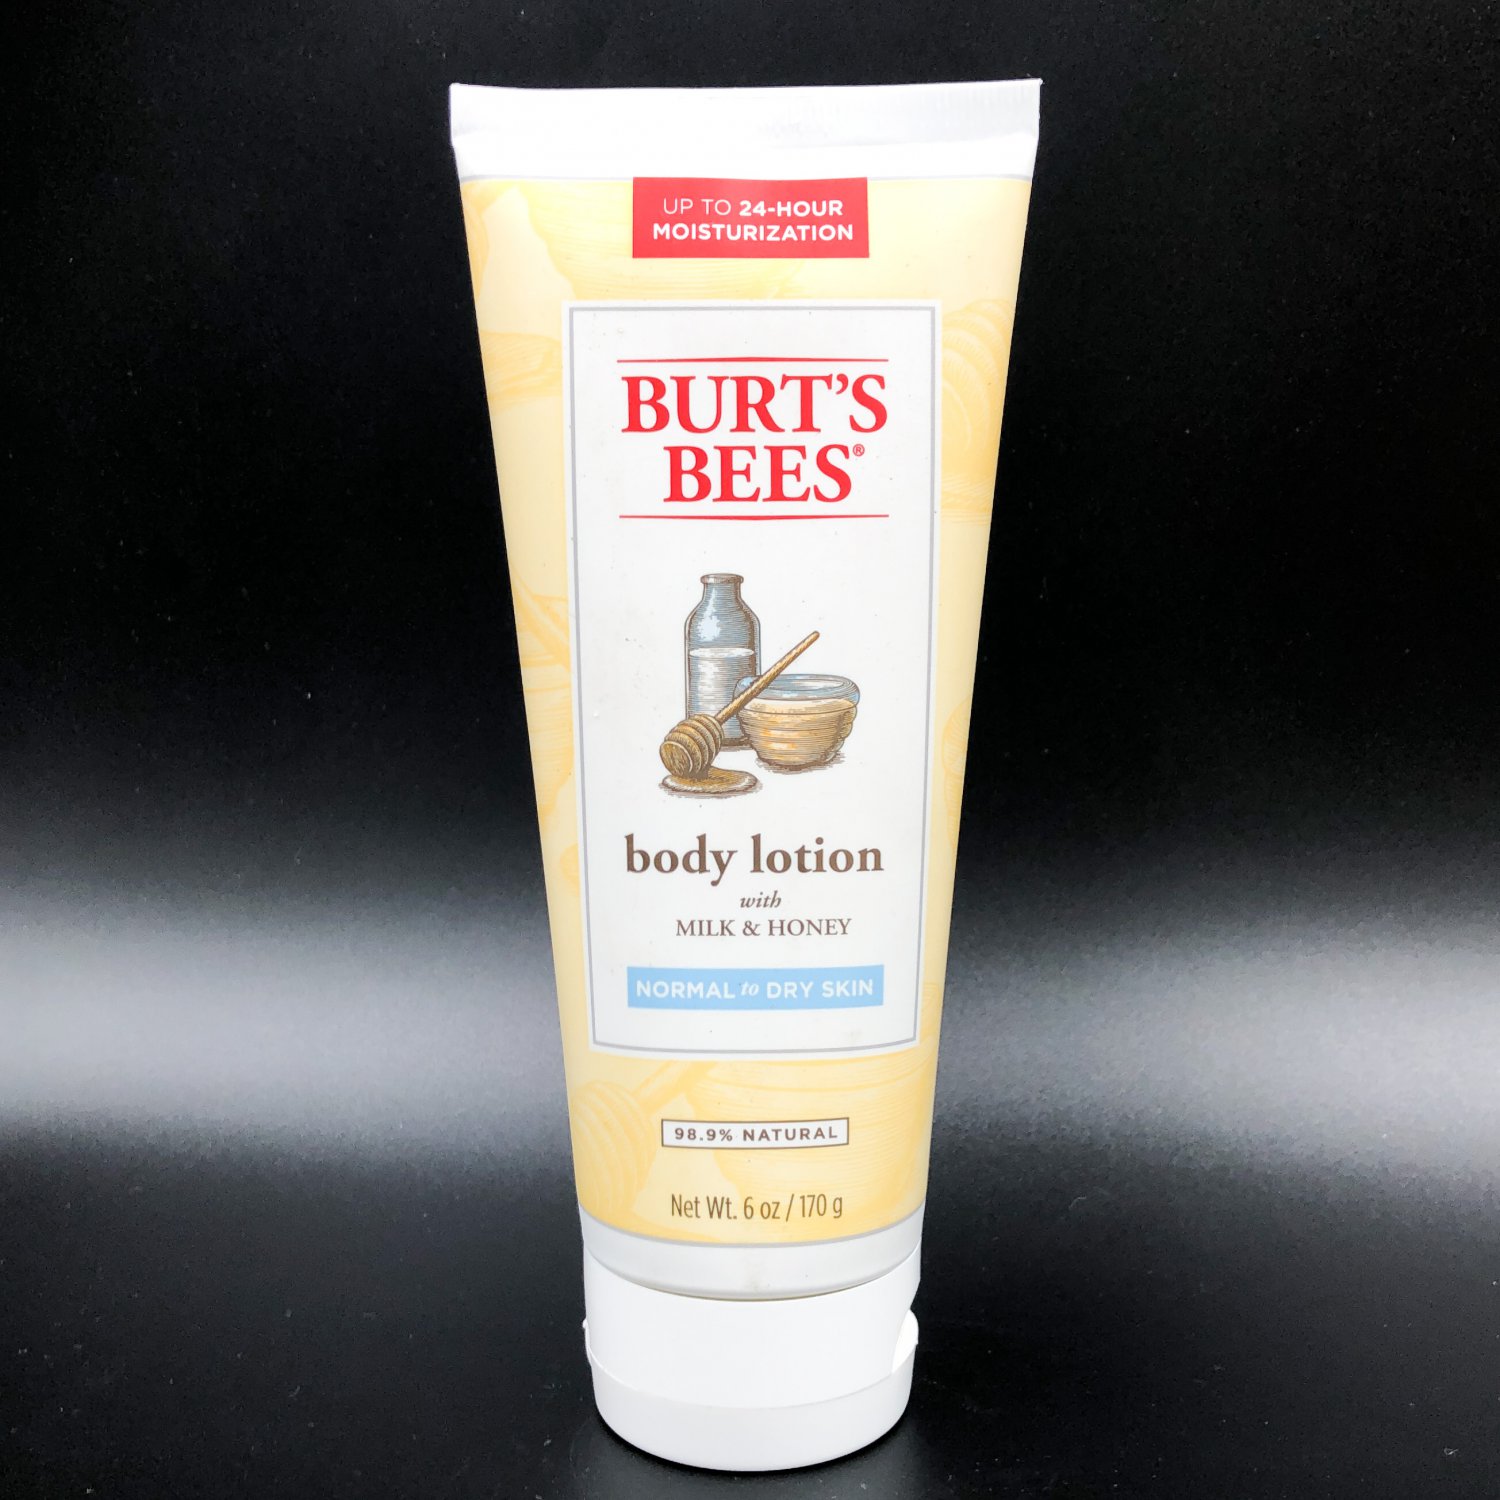 Burt’s Bees Body Lotion for Normal to Dry Skin Burts Bees